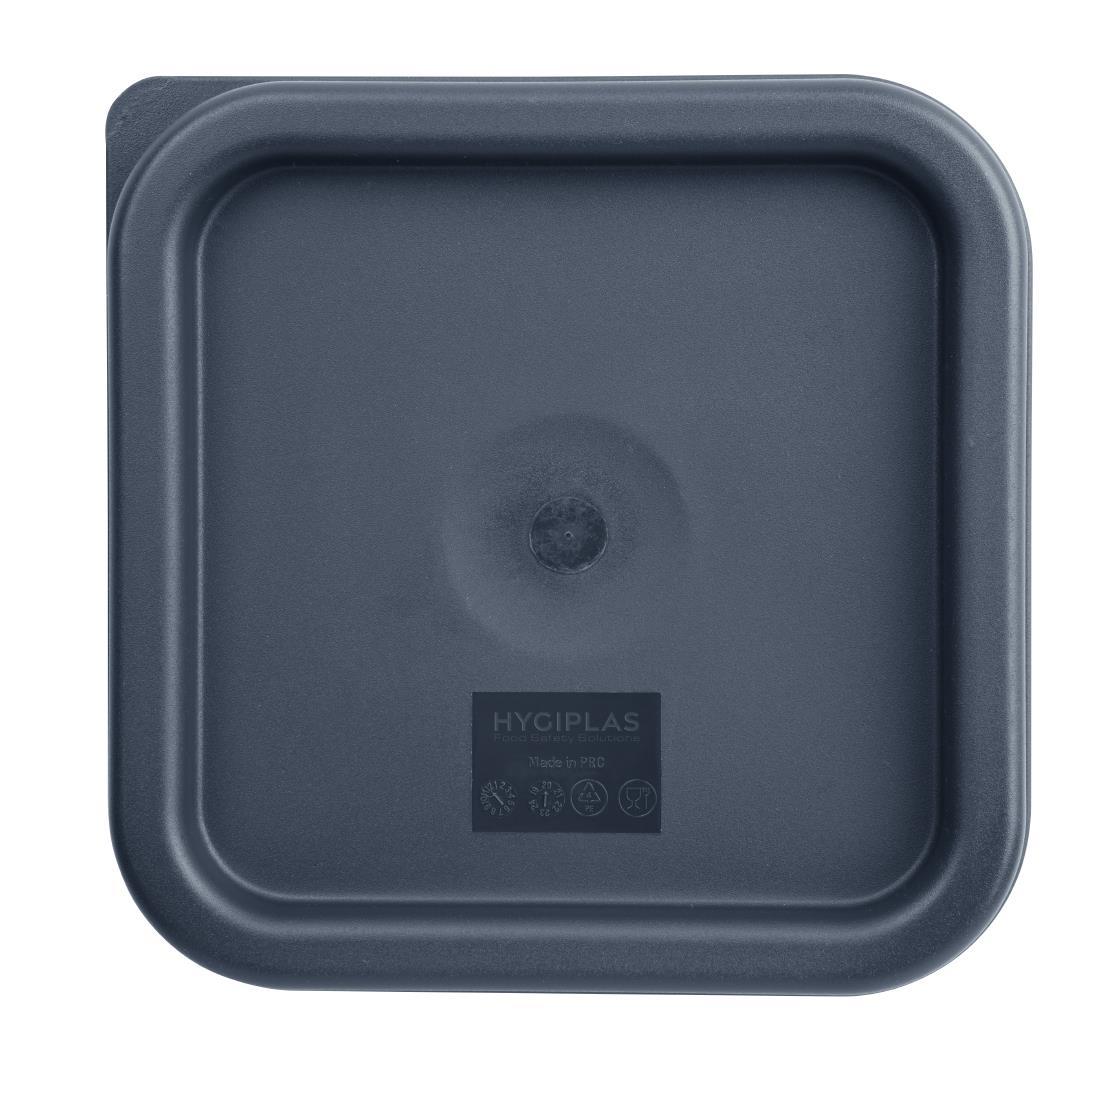 Hygiplas Square Food Storage Container Lid Blue Small - CF043  - 1